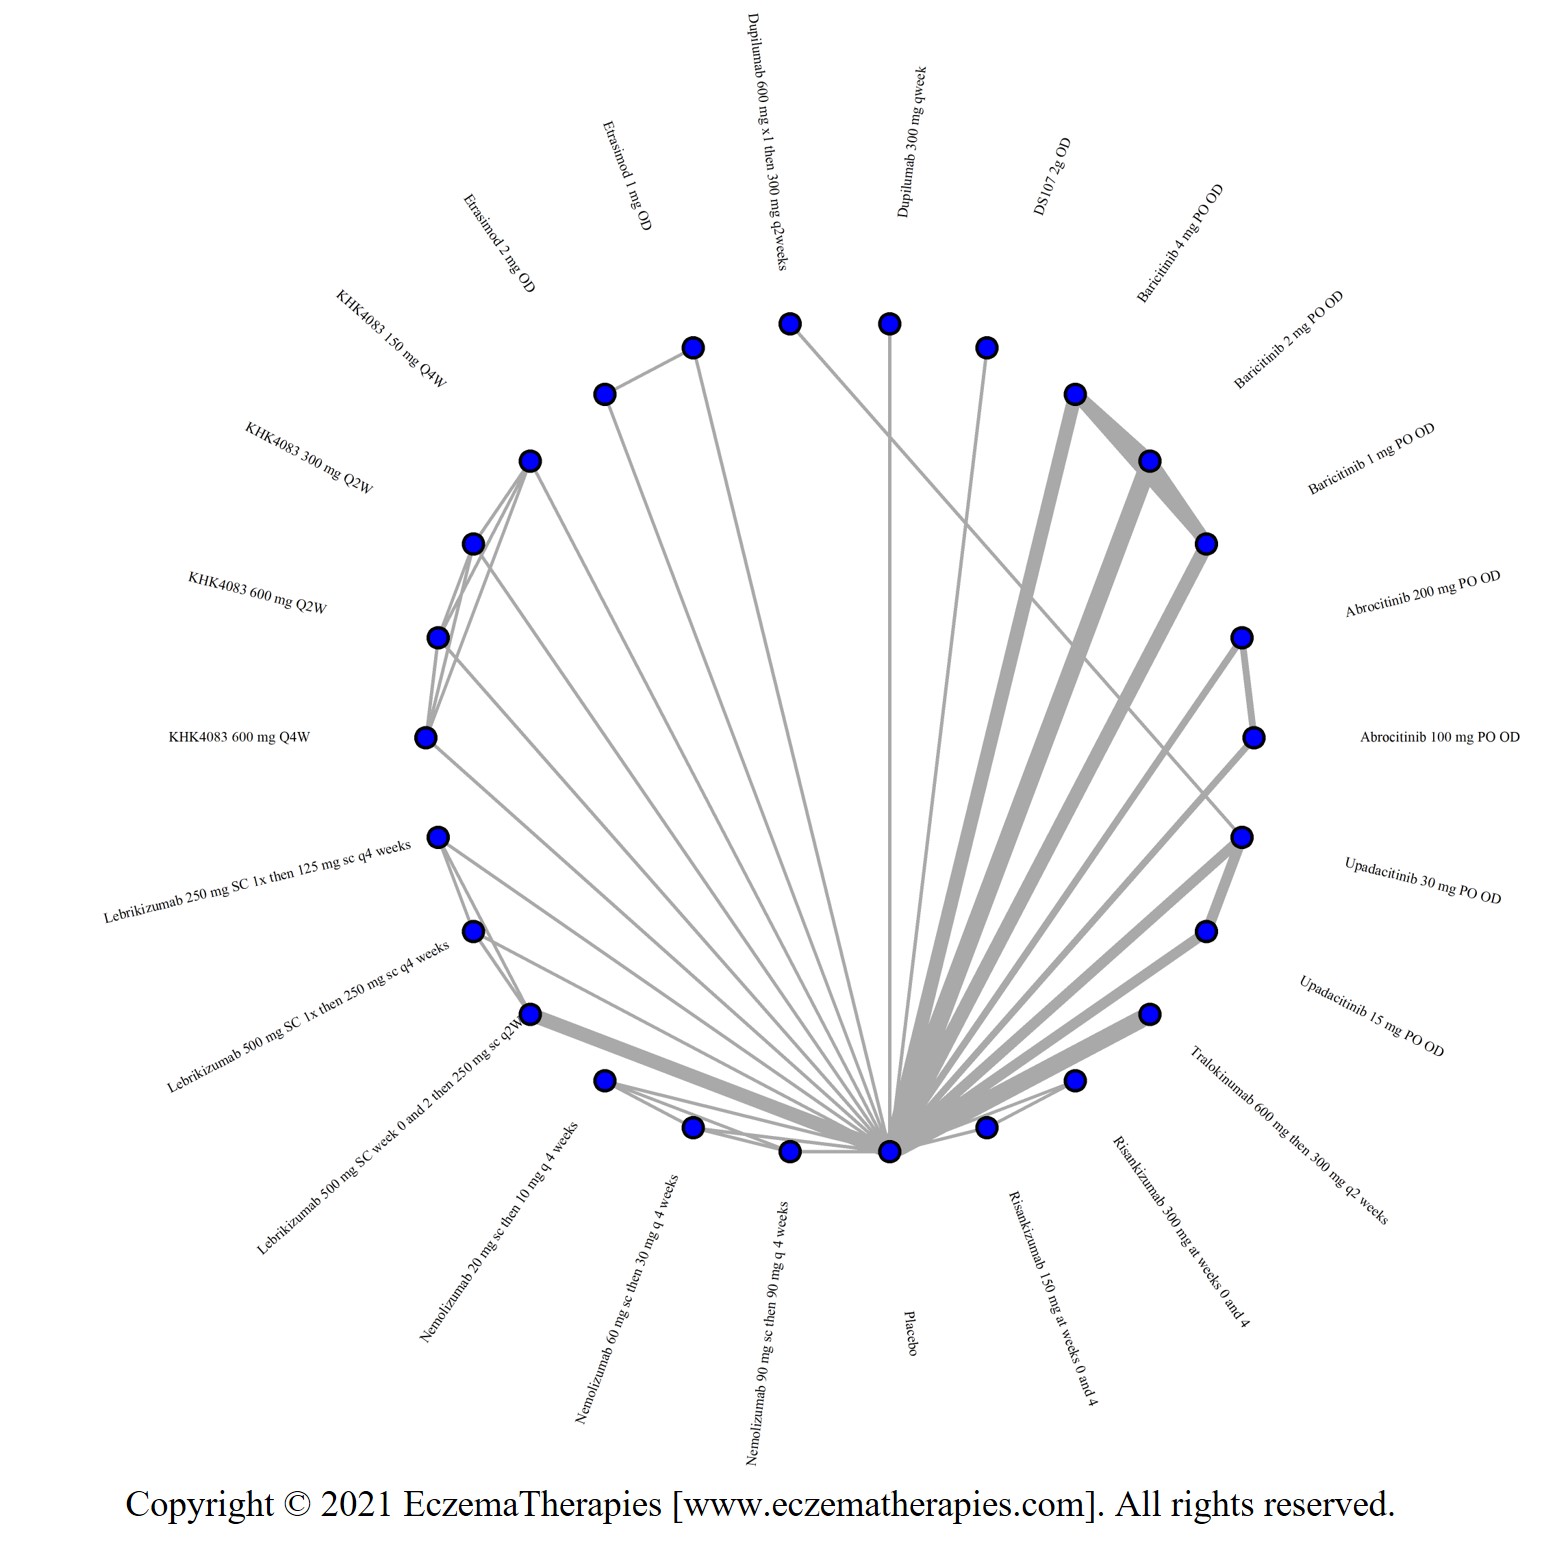 Network plot of arms included in the network meta-analysis of change in PPNRS score up to 16 weeks of treatment